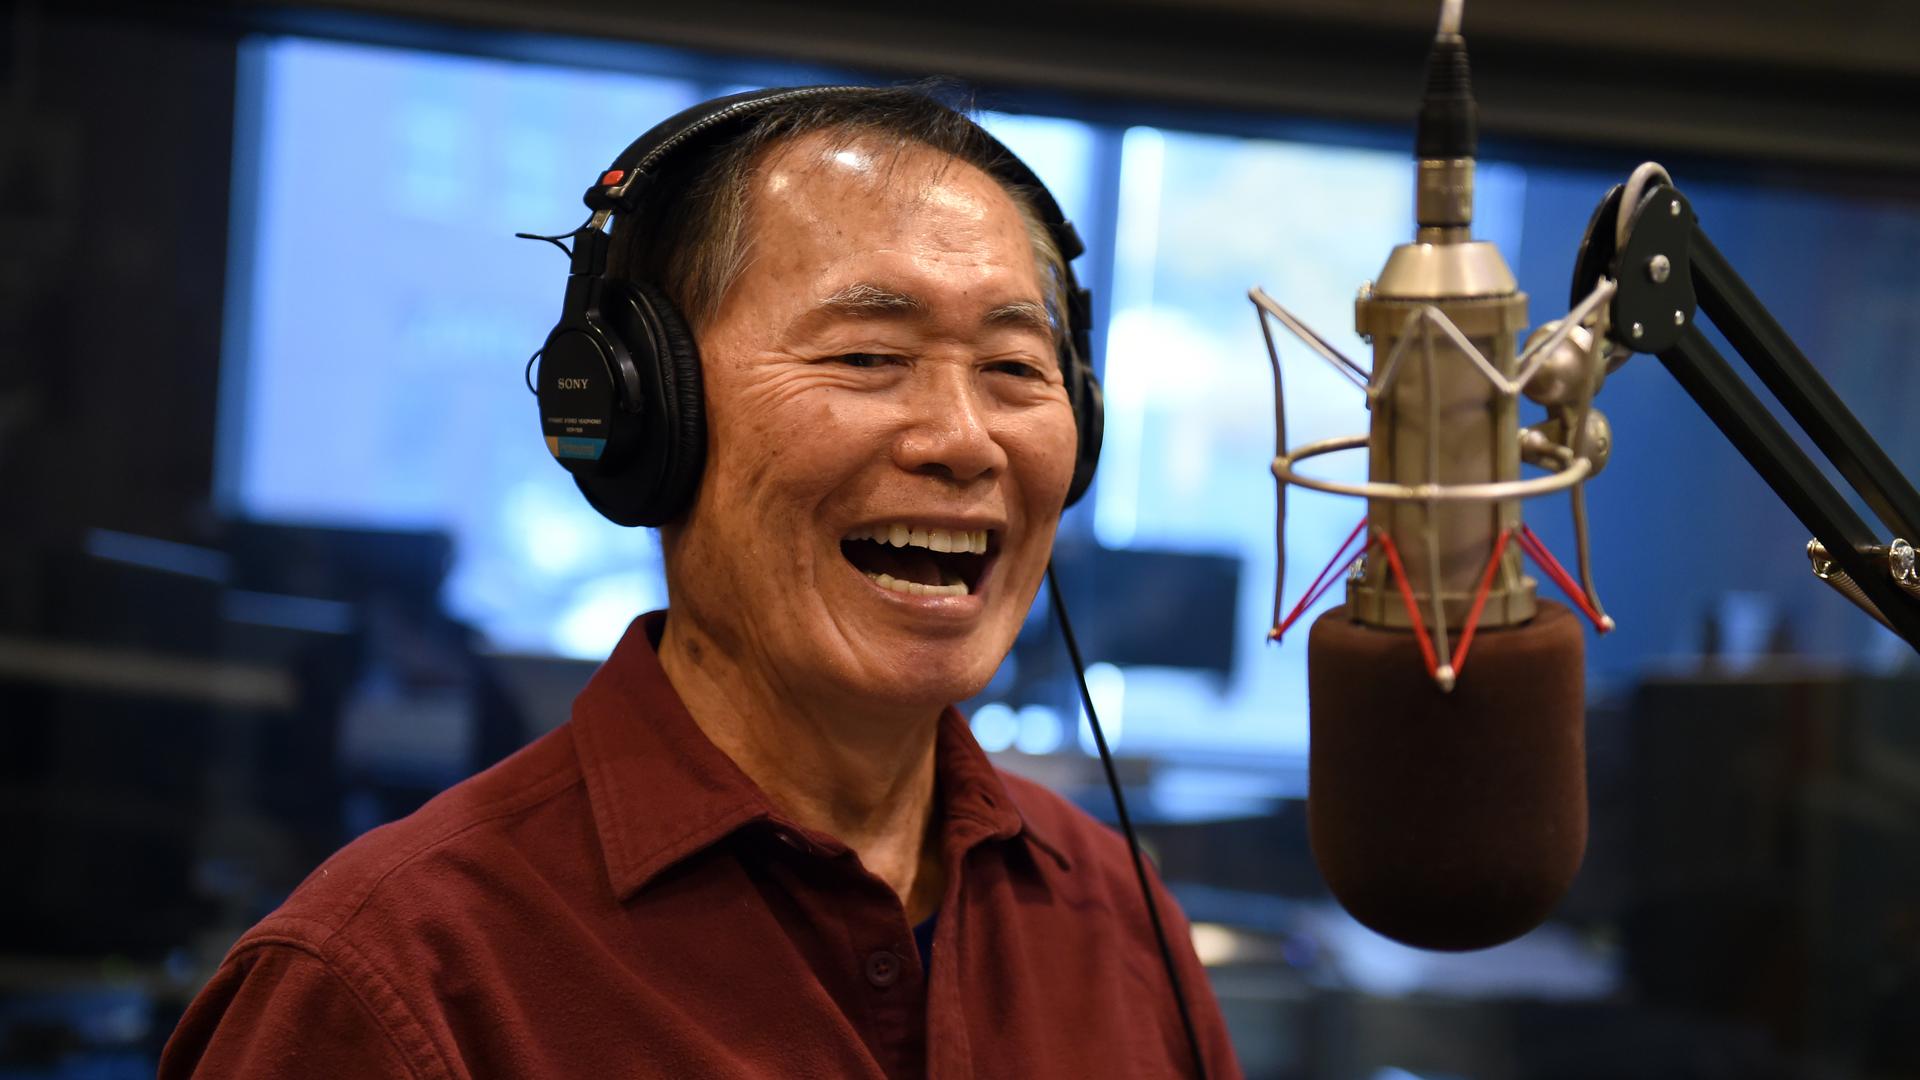 George Takei, an ctor, activist and the star of the documentary "To Be Takei," spoke about the early part of his acting career, when he regretfully took on roles that furthered Asian stereotypes. 